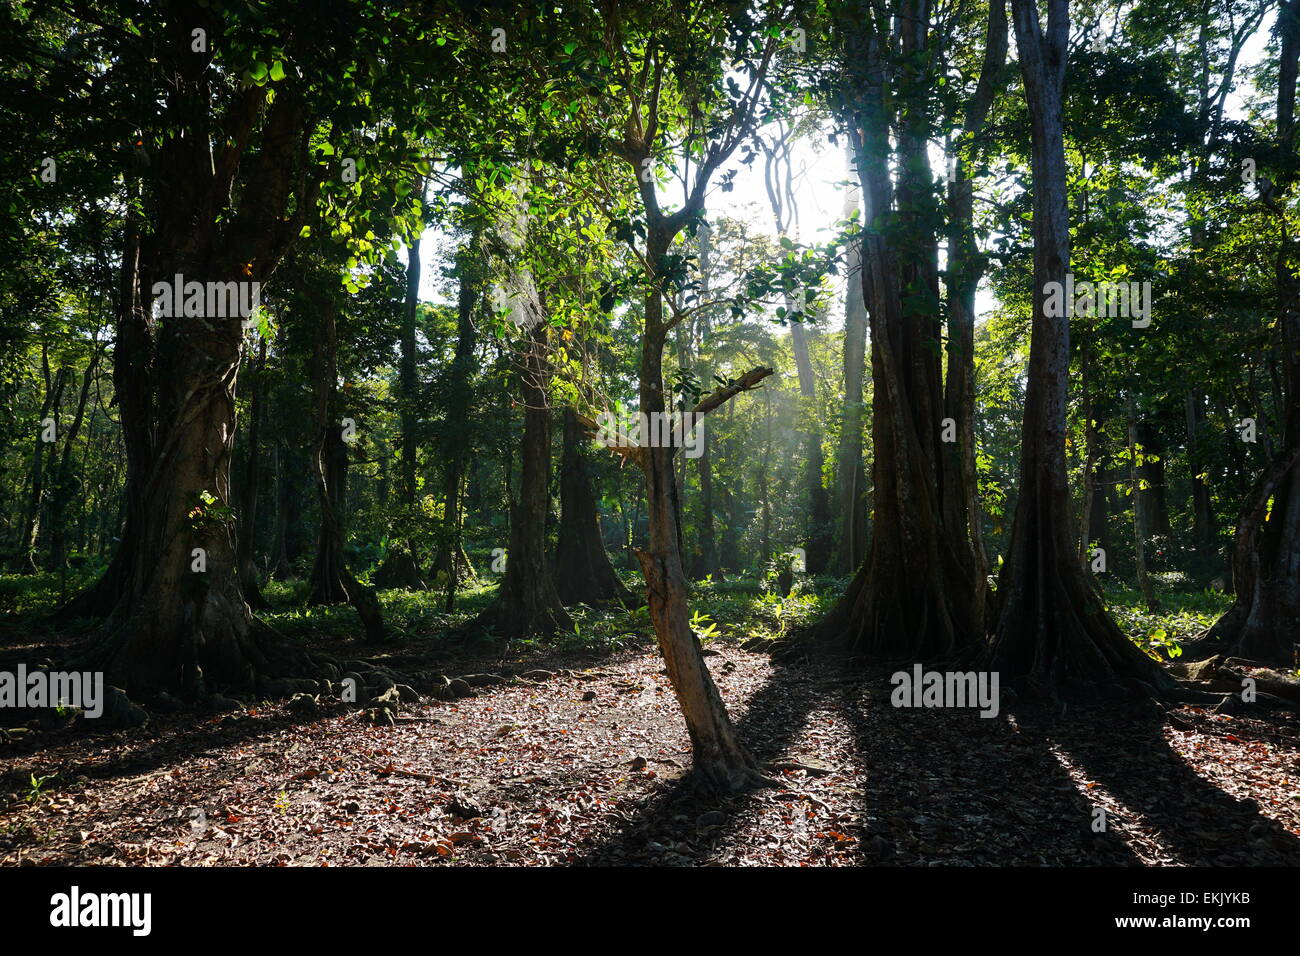 Tropical trees in forest, Caribbean side of Costa Rica, natural scene, Puerto Viejo de Talamanca Stock Photo